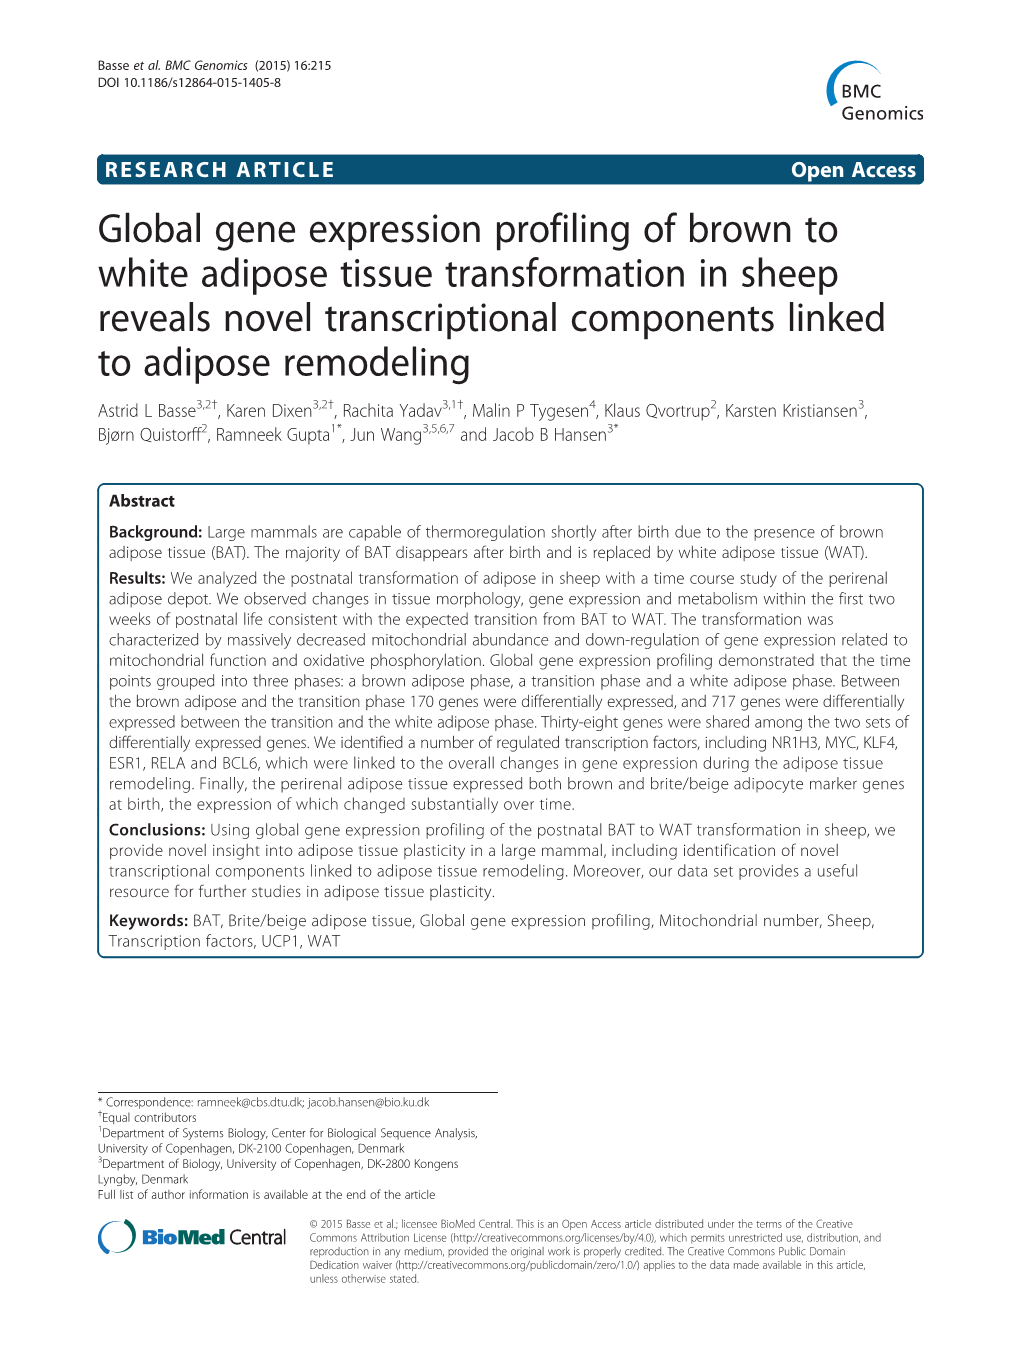 Global Gene Expression Profiling of Brown to White Adipose Tissue Transformation in Sheep Reveals Novel Transcriptional Componen